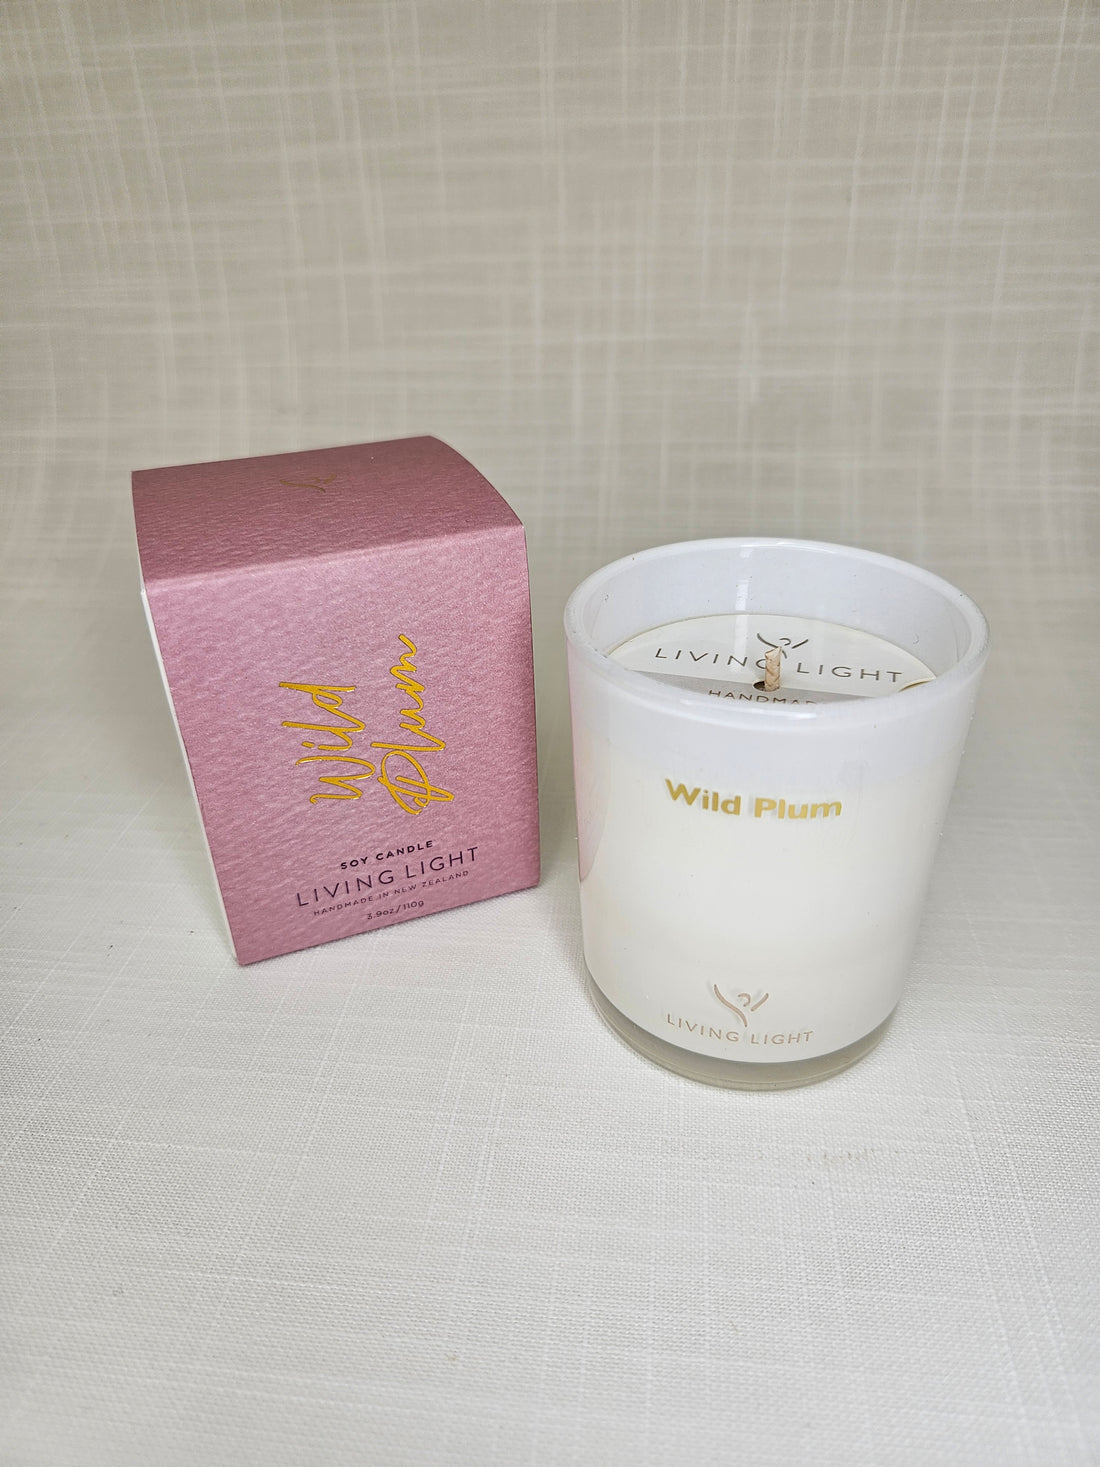 Living Light Soy Mini Candle in Wild Plum.